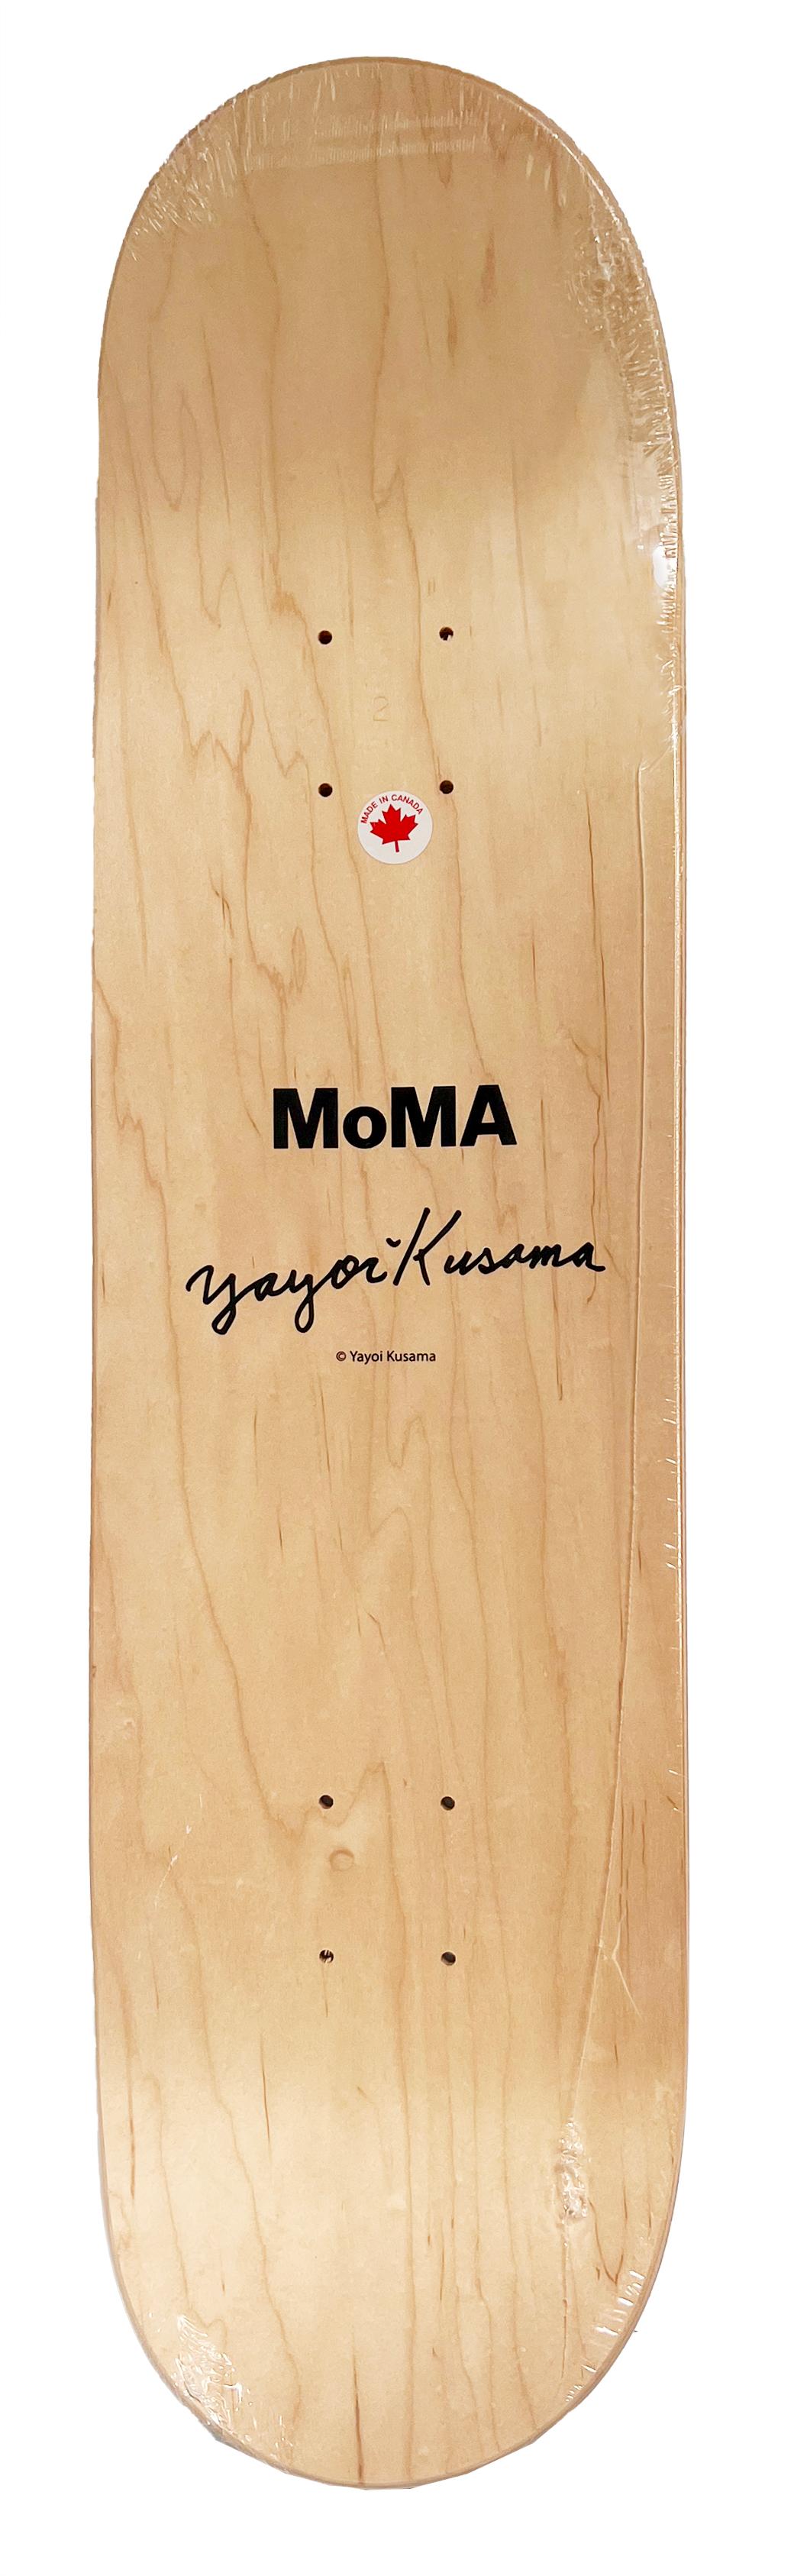 Yayoi Kusama MoMa Skateboard Deck:
This Kusama skateboard deck features Kusama's Dots Obsession imagery and makes for standout Kusama wall art that hangs with ease. Published by MoMa New York. The work is completely sold out/out of print.

Medium: